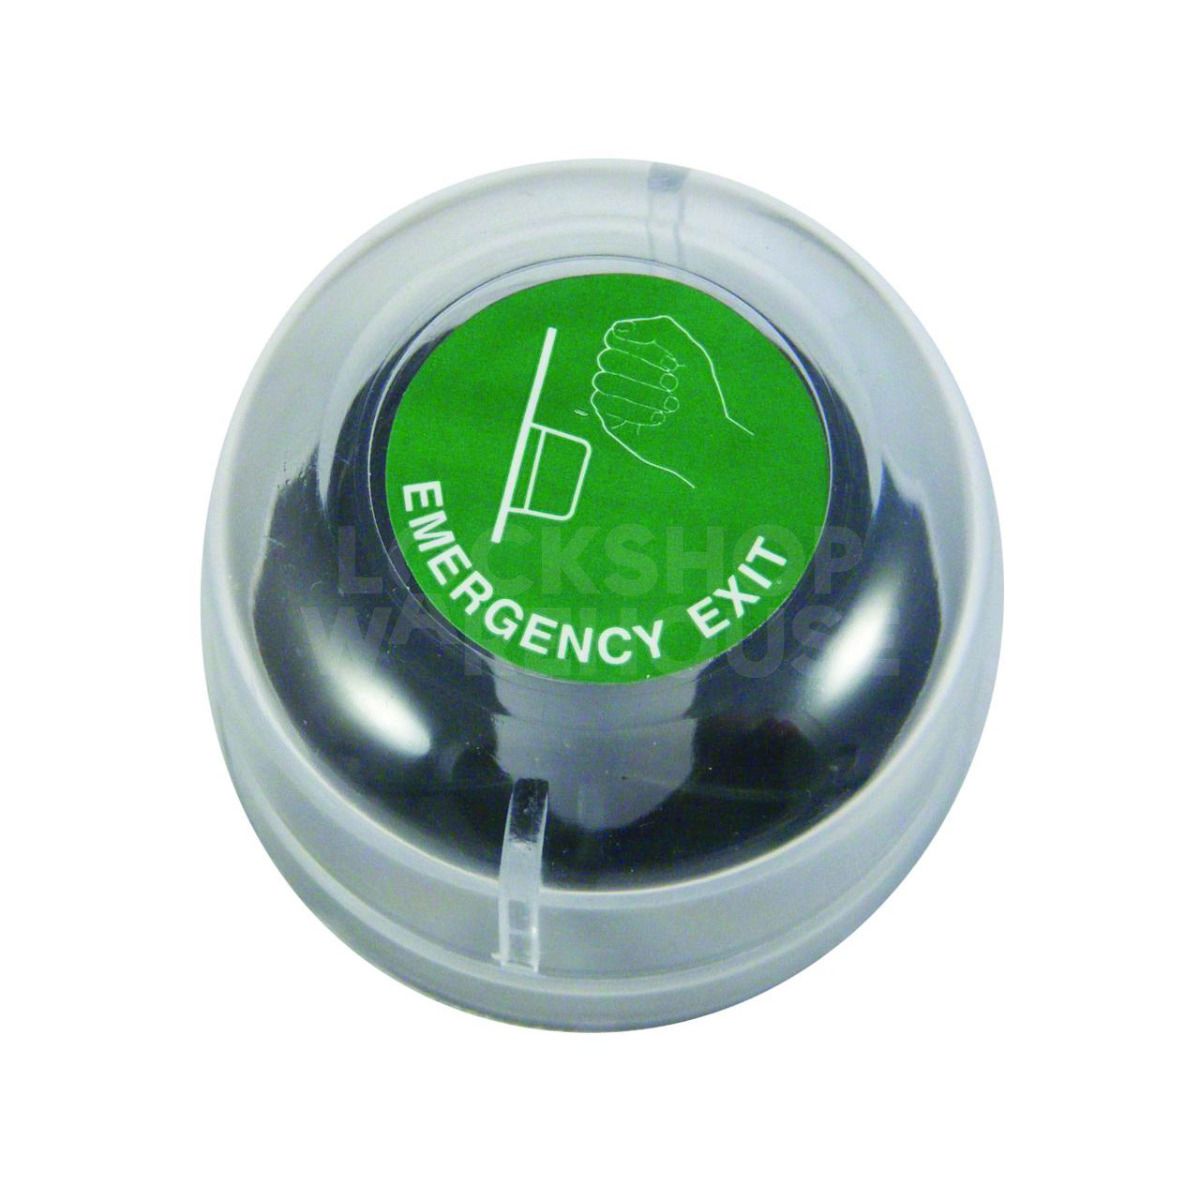 Emergency Exit Cover suitable for use with Oval/Euro Cylinders